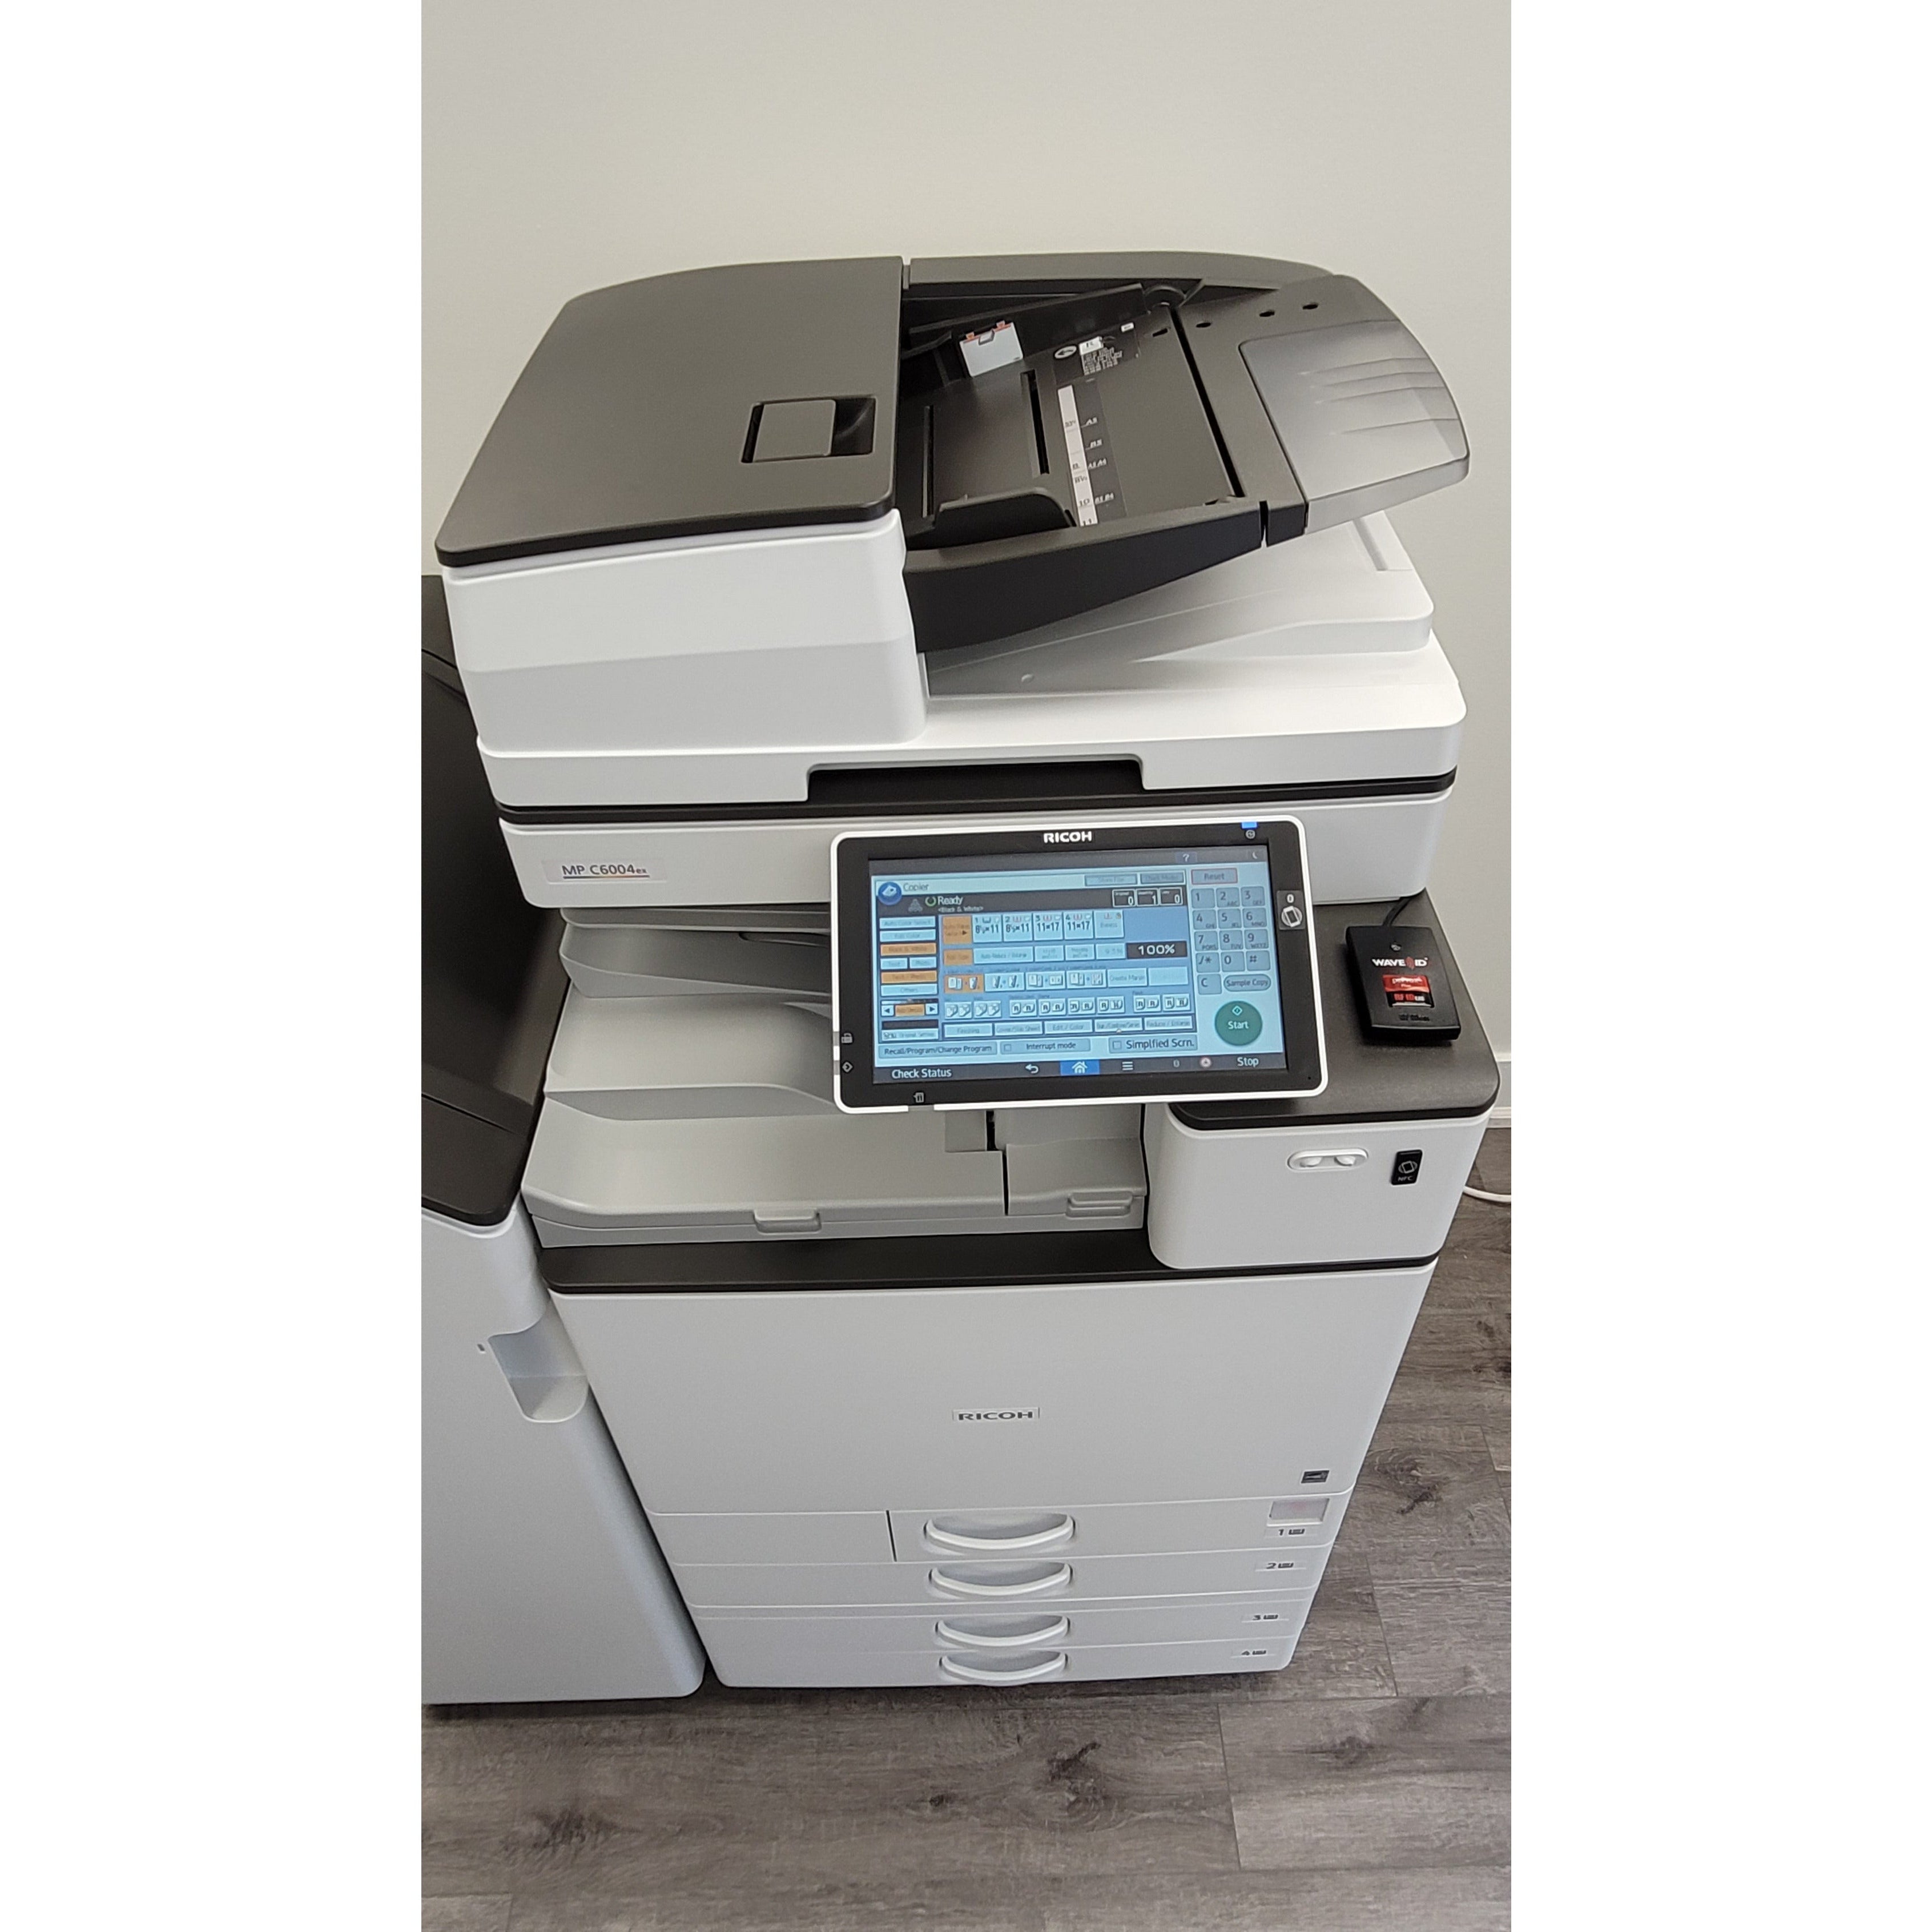 Pre-Owned Ricoh MP C6004EX Multifunction Color Laser Printer 11 x 17,  12 x 18 Paper Size 4 Trays